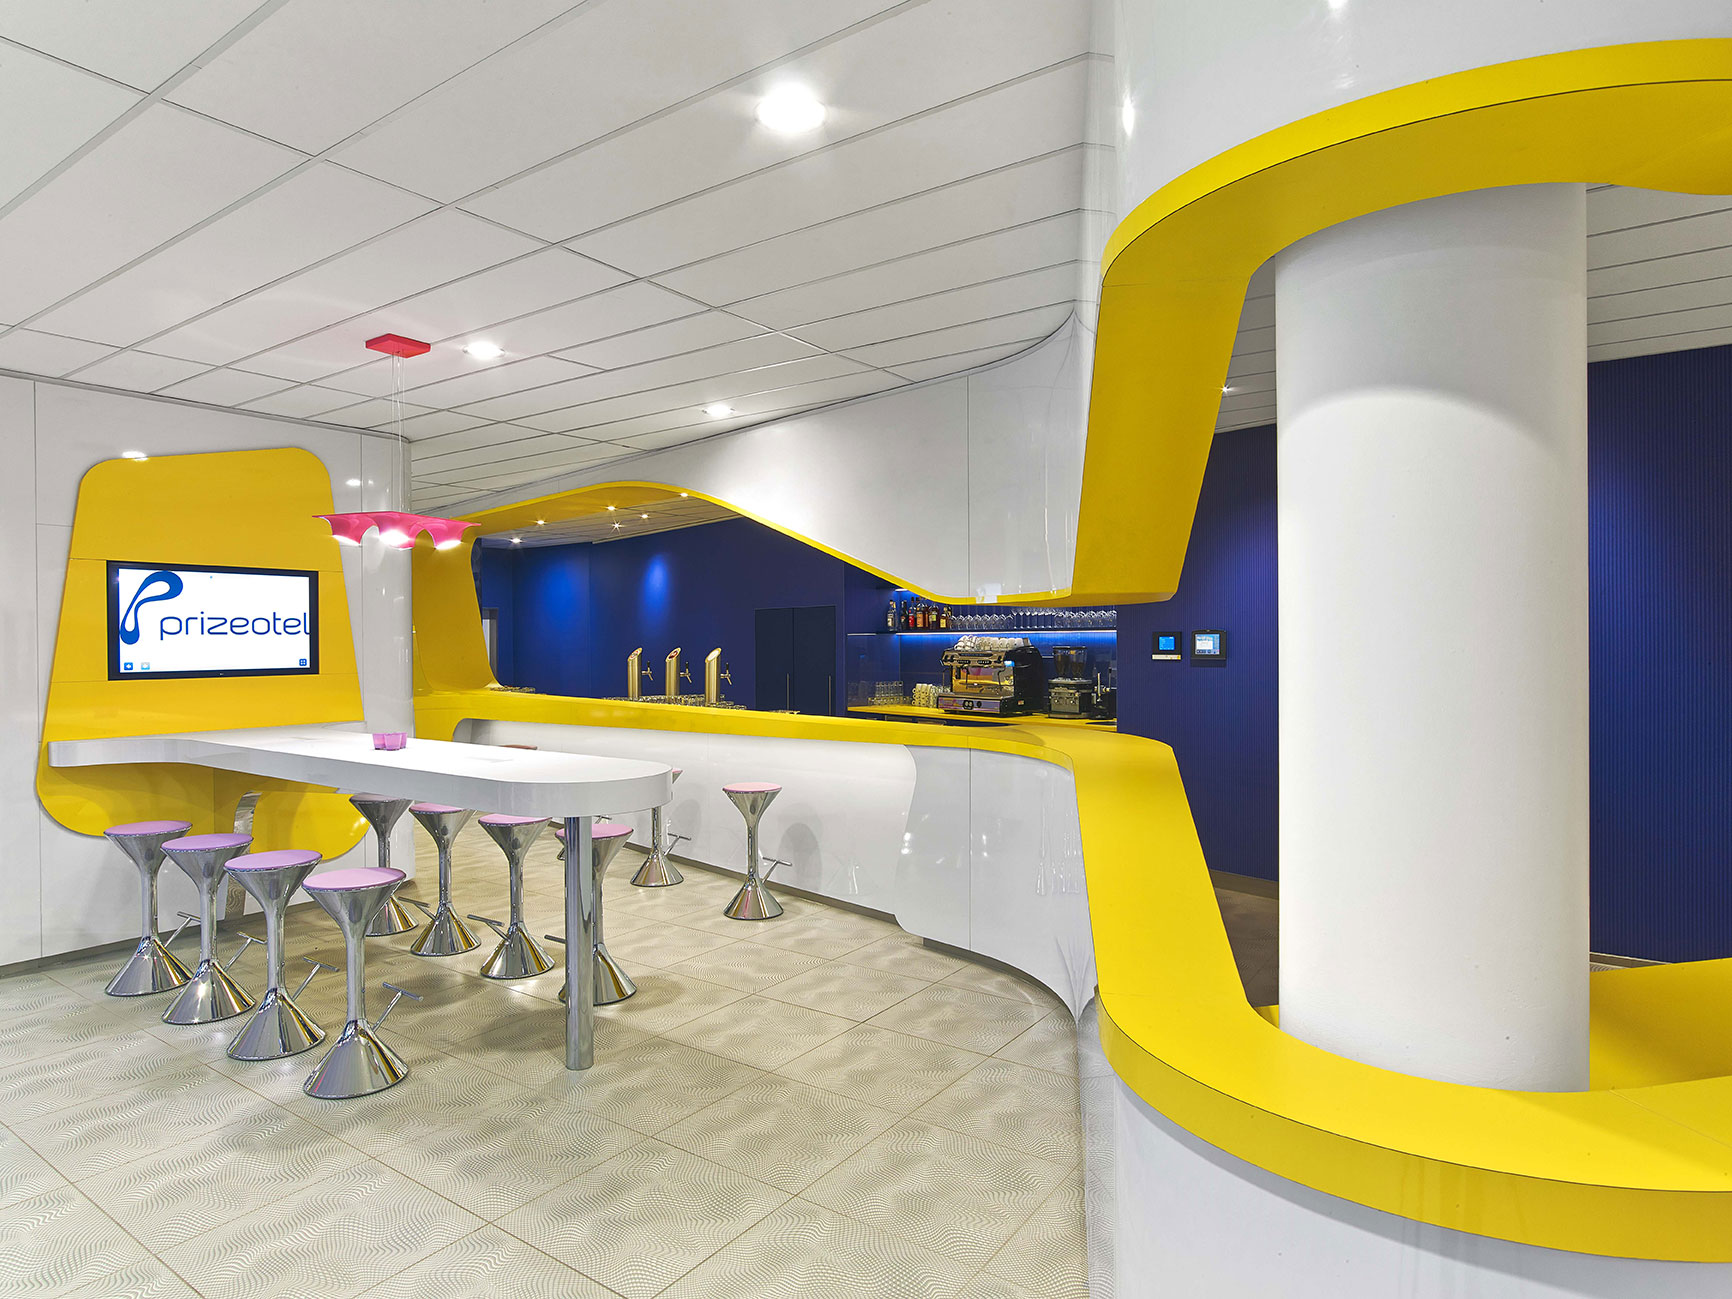 Lobby bar at prizeotel Hanover-City with yellow and purple colours